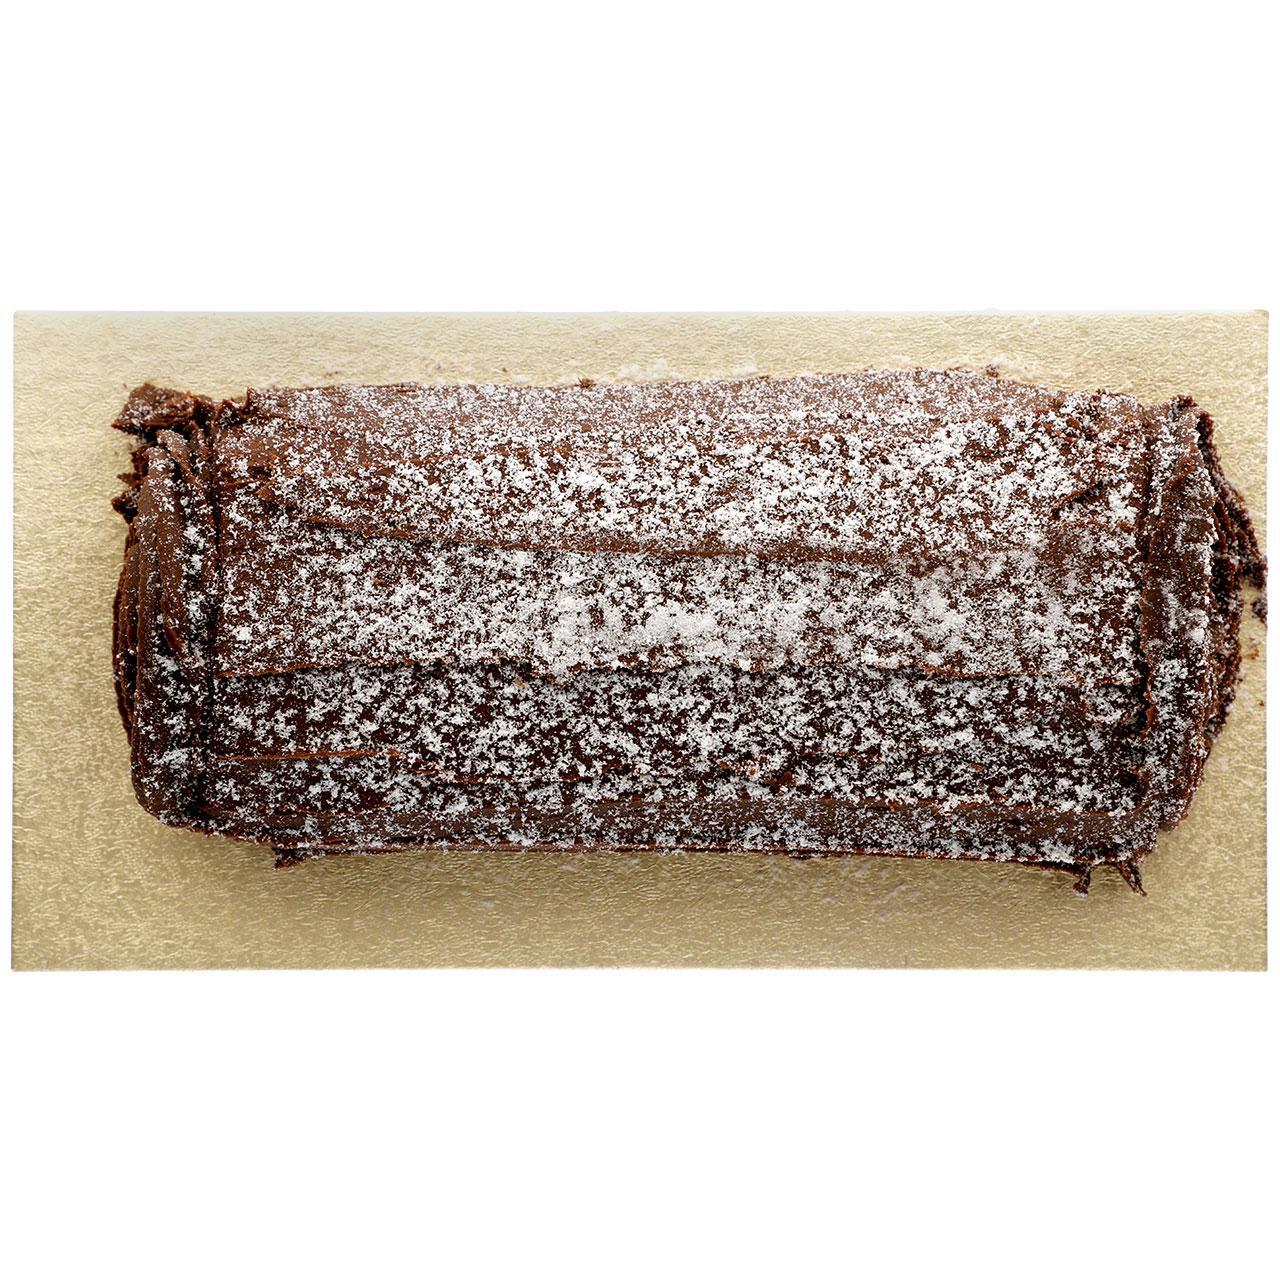 M&S Hand Decorated Chocolate Yule Log 495g